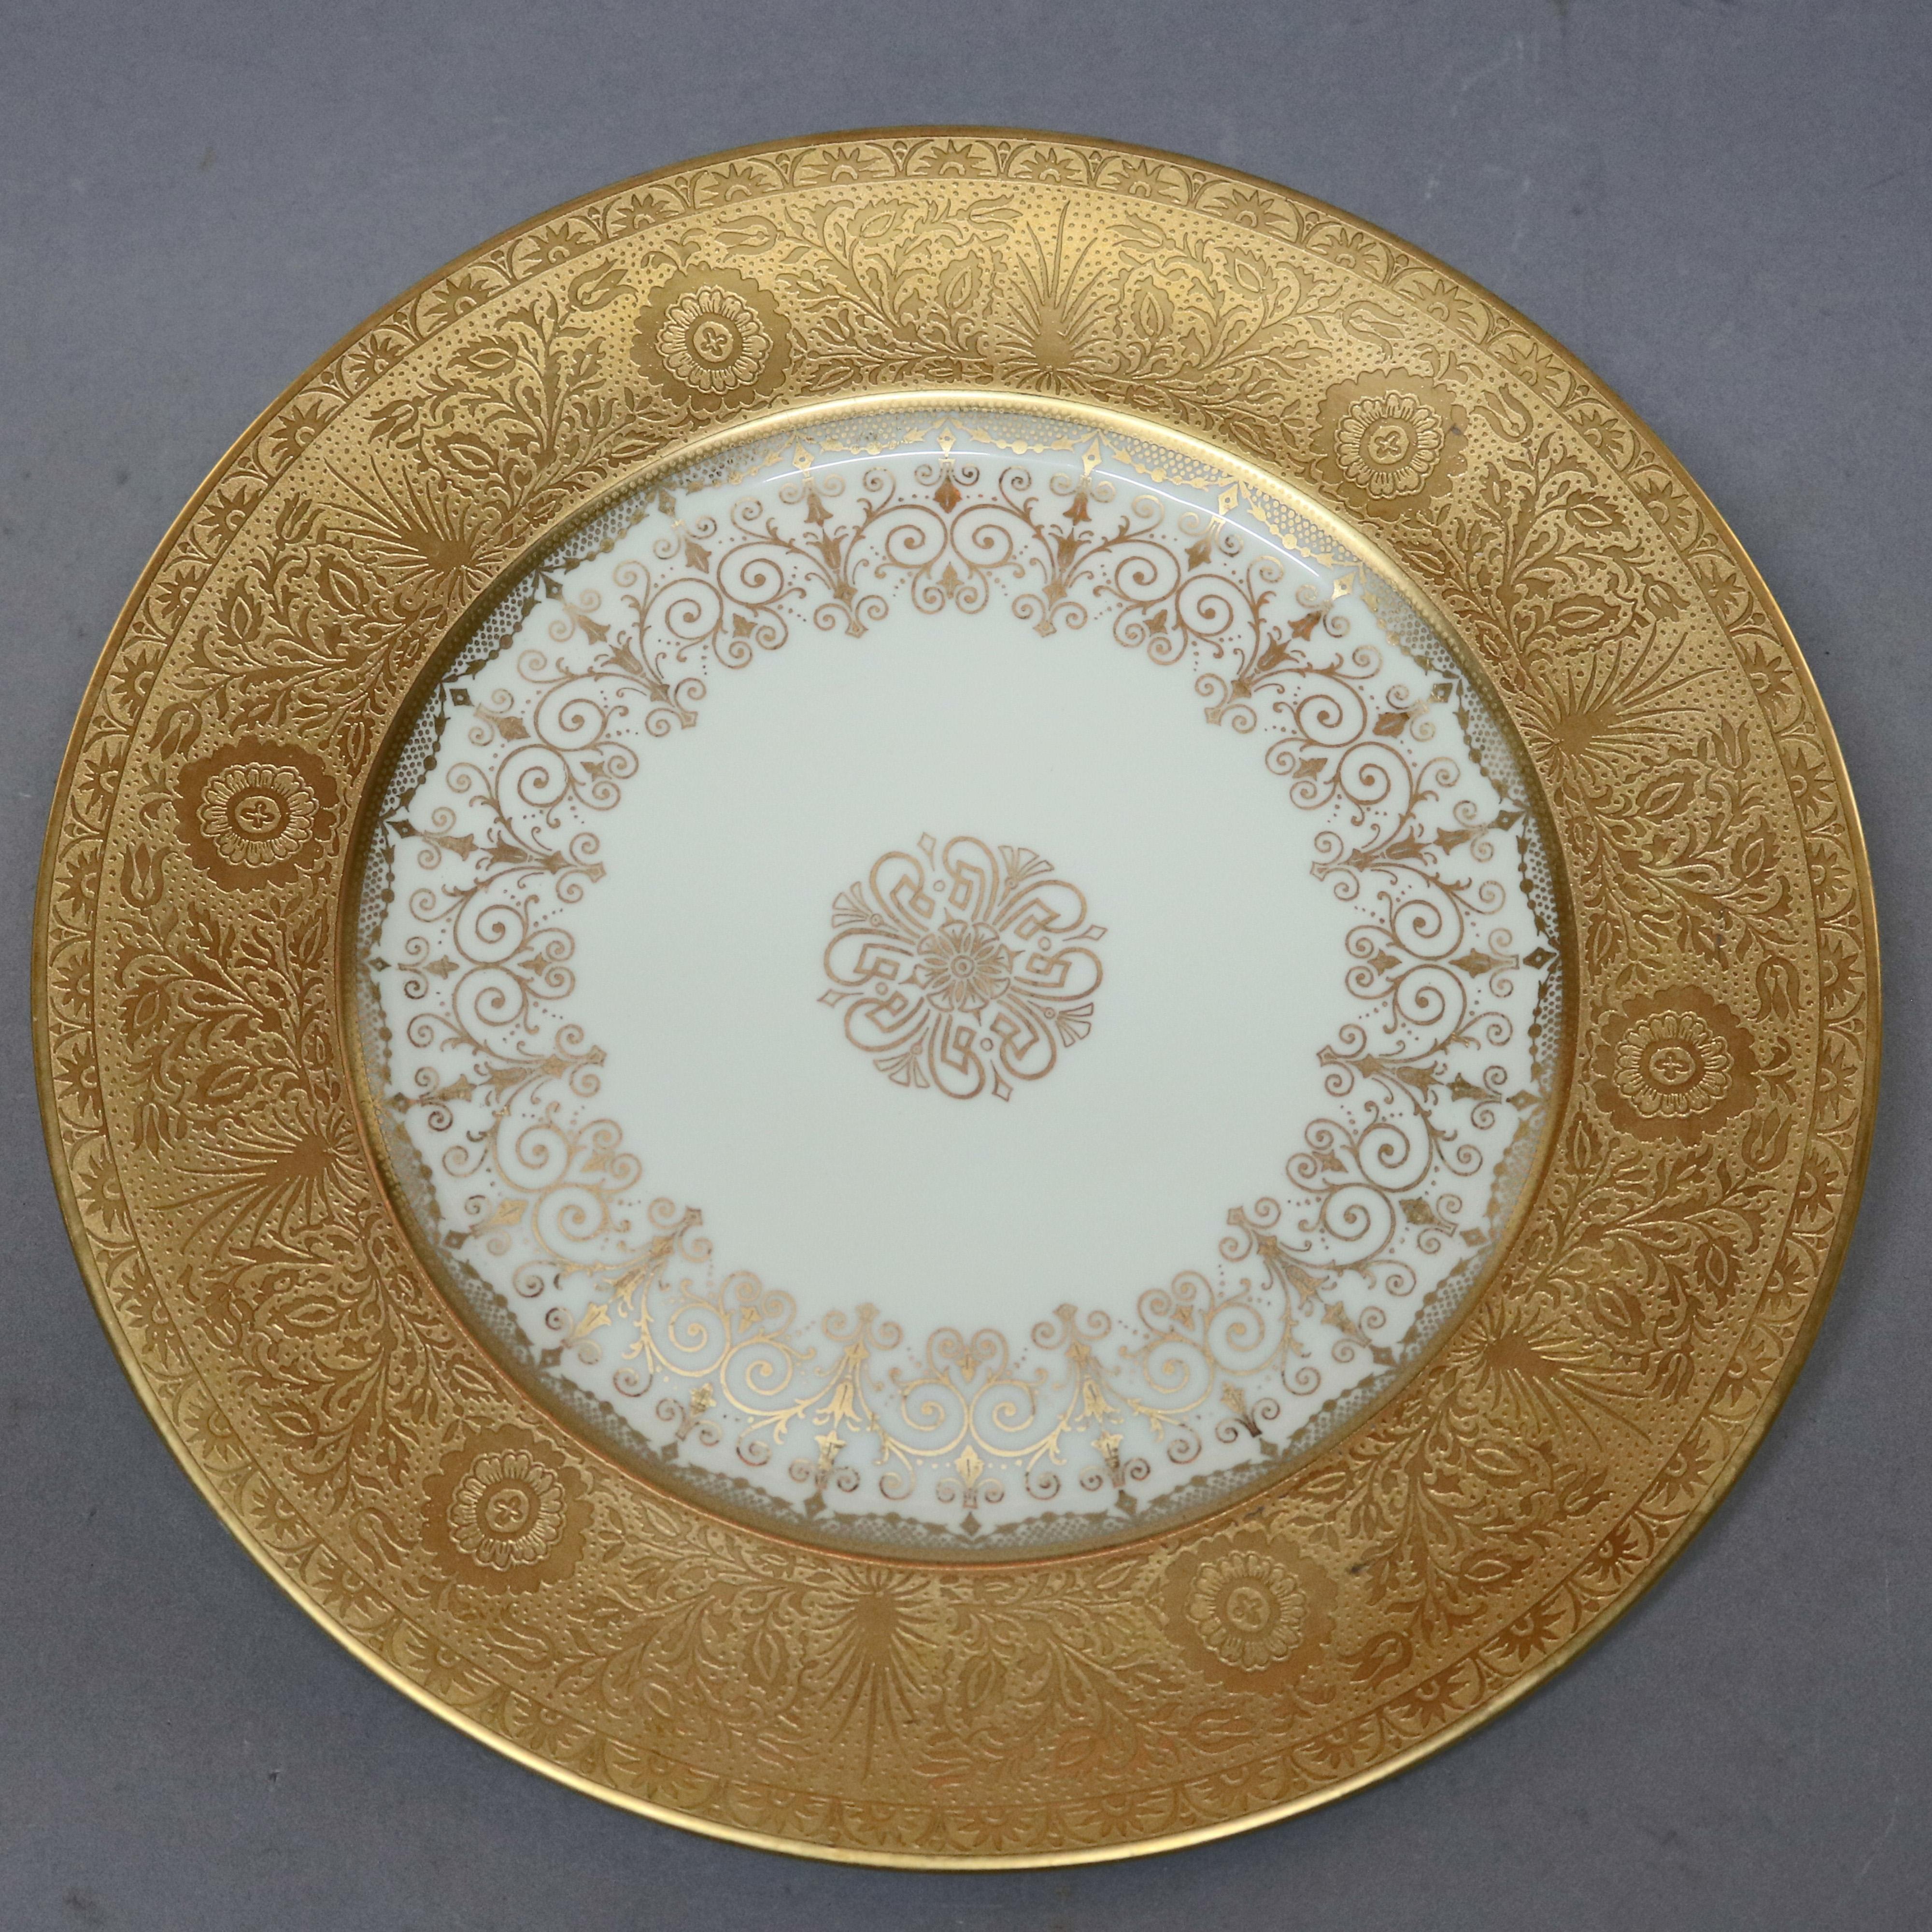 An antique set of eight Selb Bavaria Heinrich porcelain dinner plates offer gilt rims with scroll and foliate decoration, well with scroll gilt filigree, en verso stamp as photographed, circa 1900.

Measures - .75